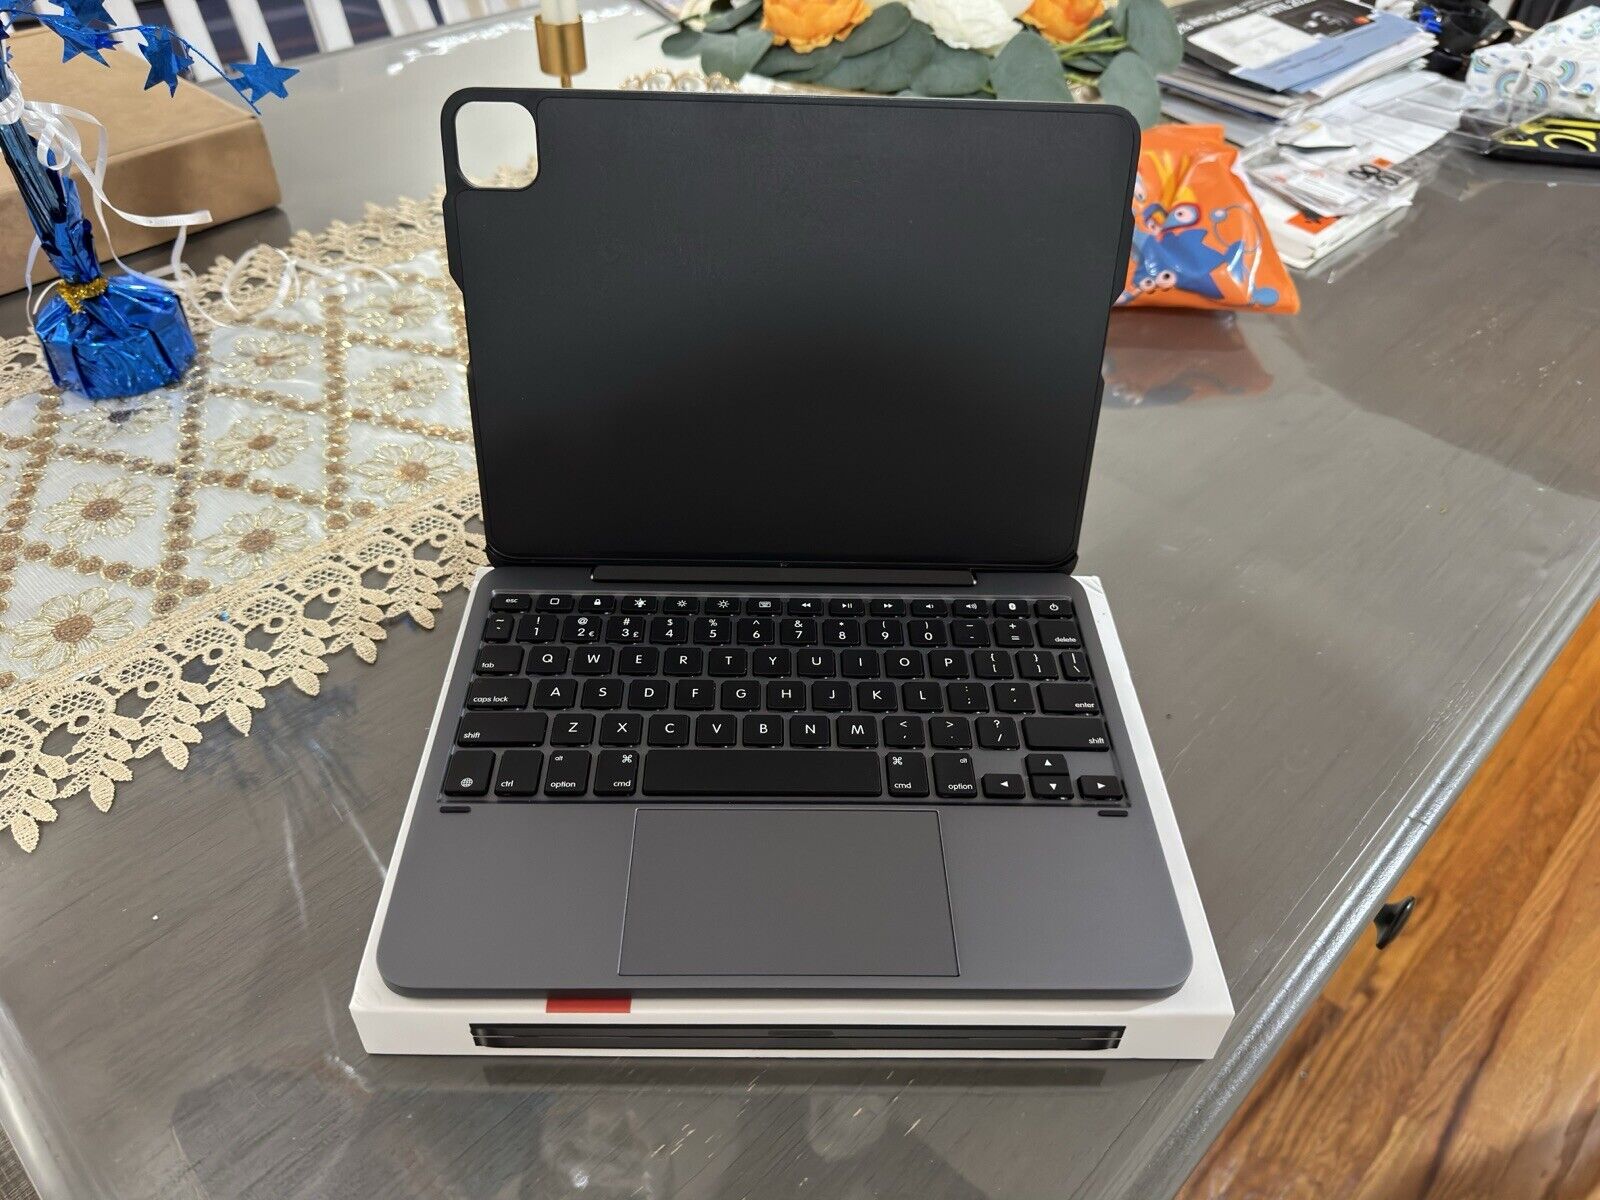 Brydge MAX+ Keyboard Case for 11\